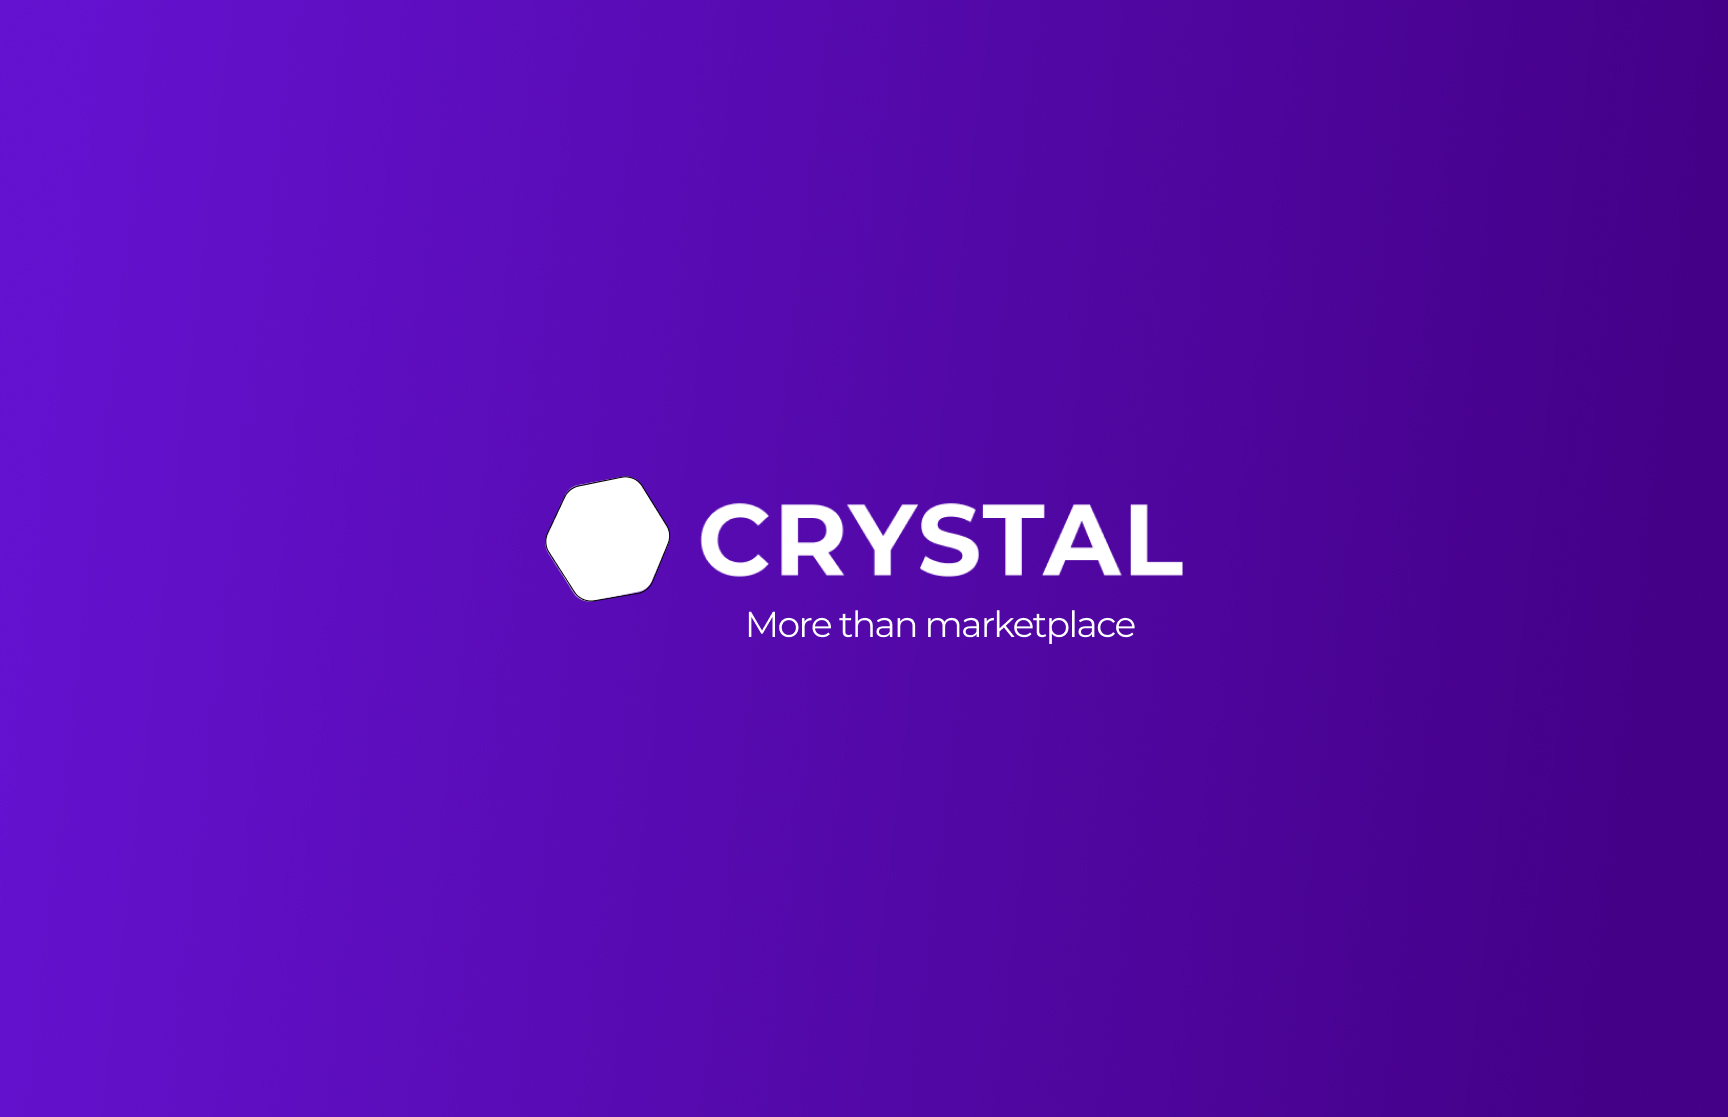 Crystal more